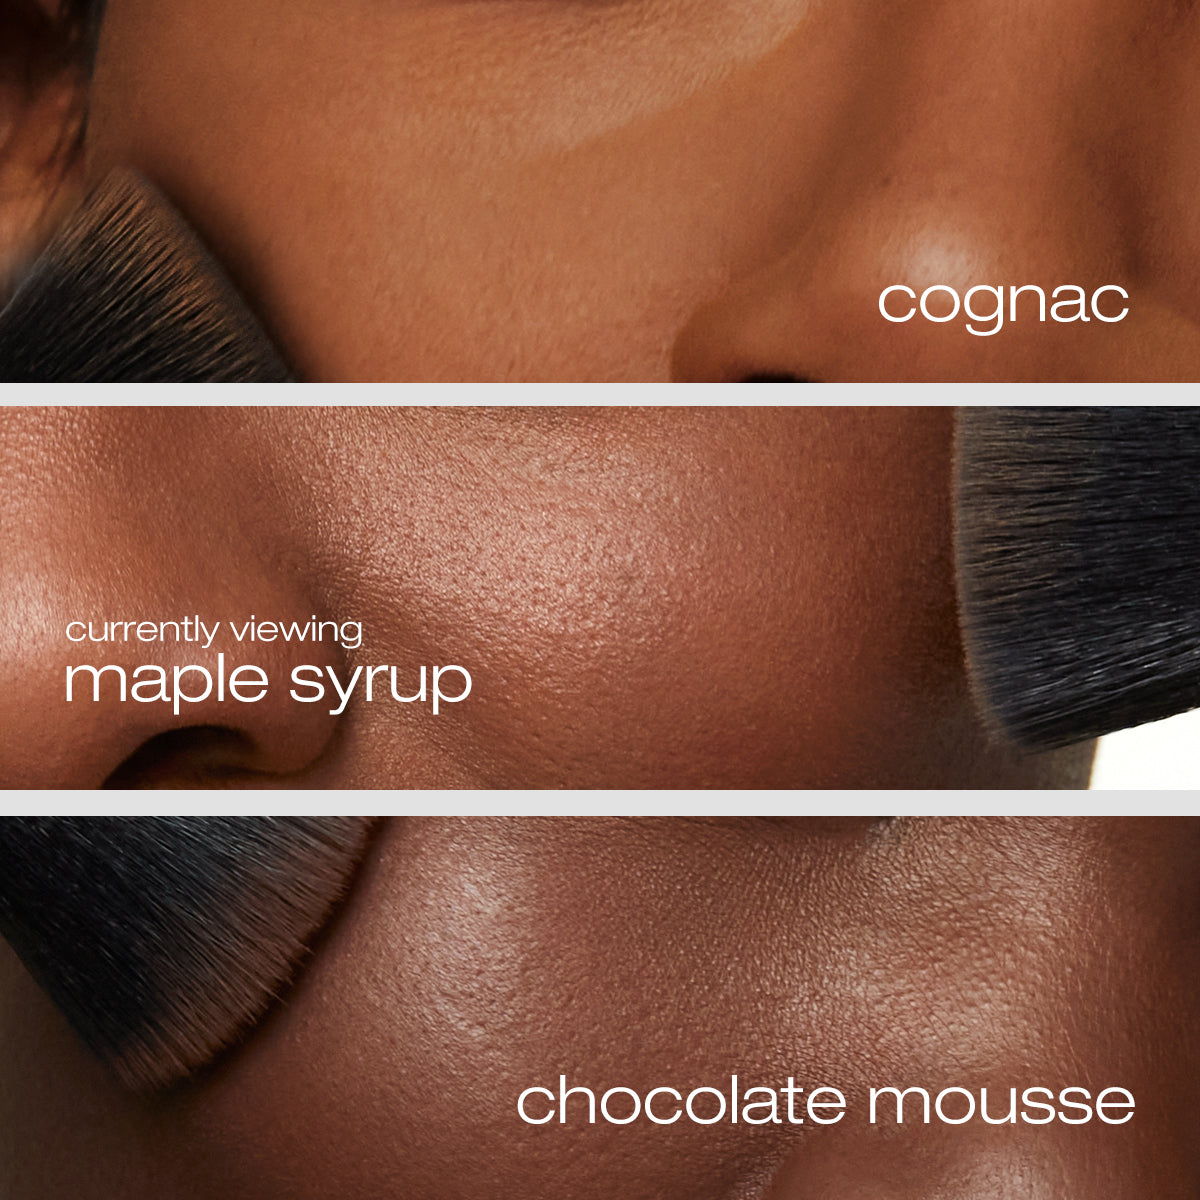 Model applying cognac, maple syrup, and chocolate mousse foundation on cheeks